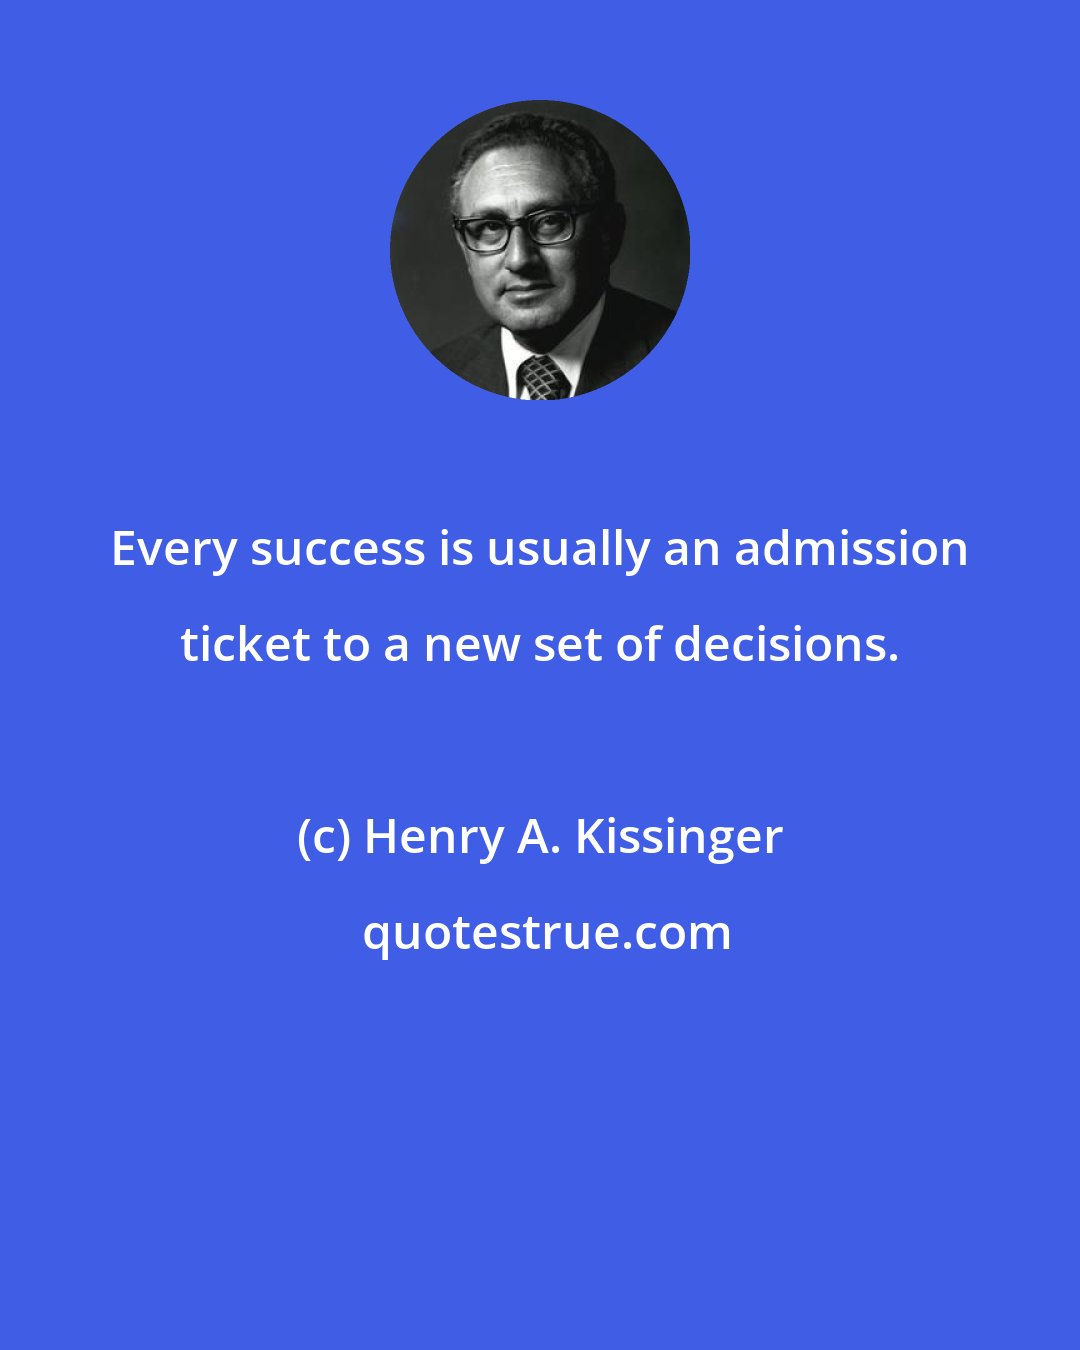 Henry A. Kissinger: Every success is usually an admission ticket to a new set of decisions.